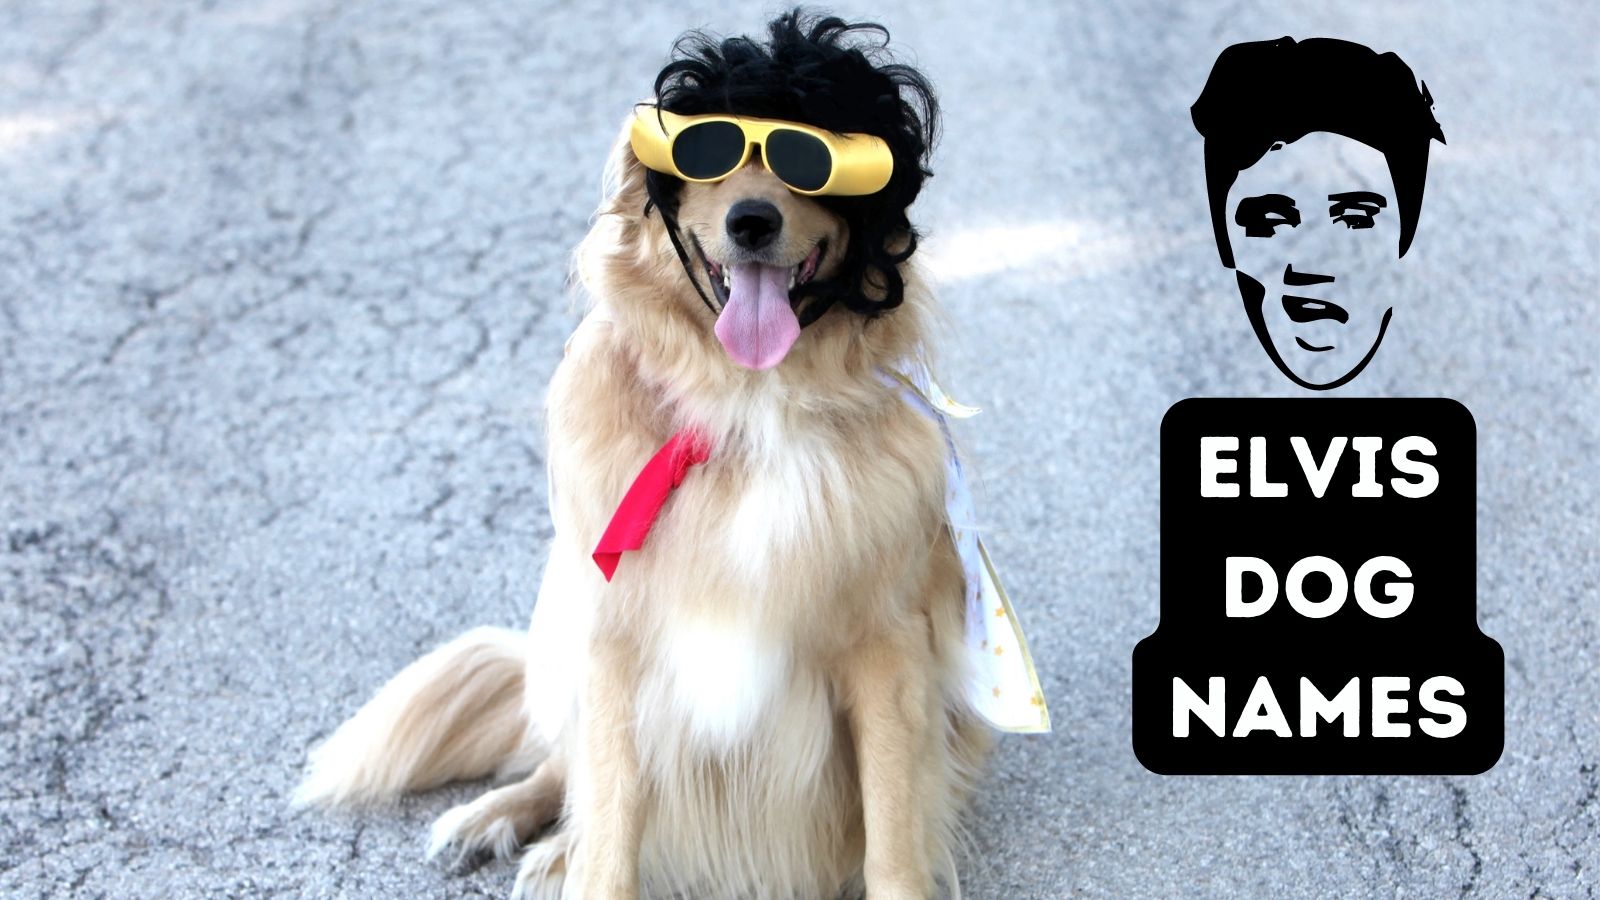 Elvis Dog Names - dog names inspired by Elvis movies, family and Elvis